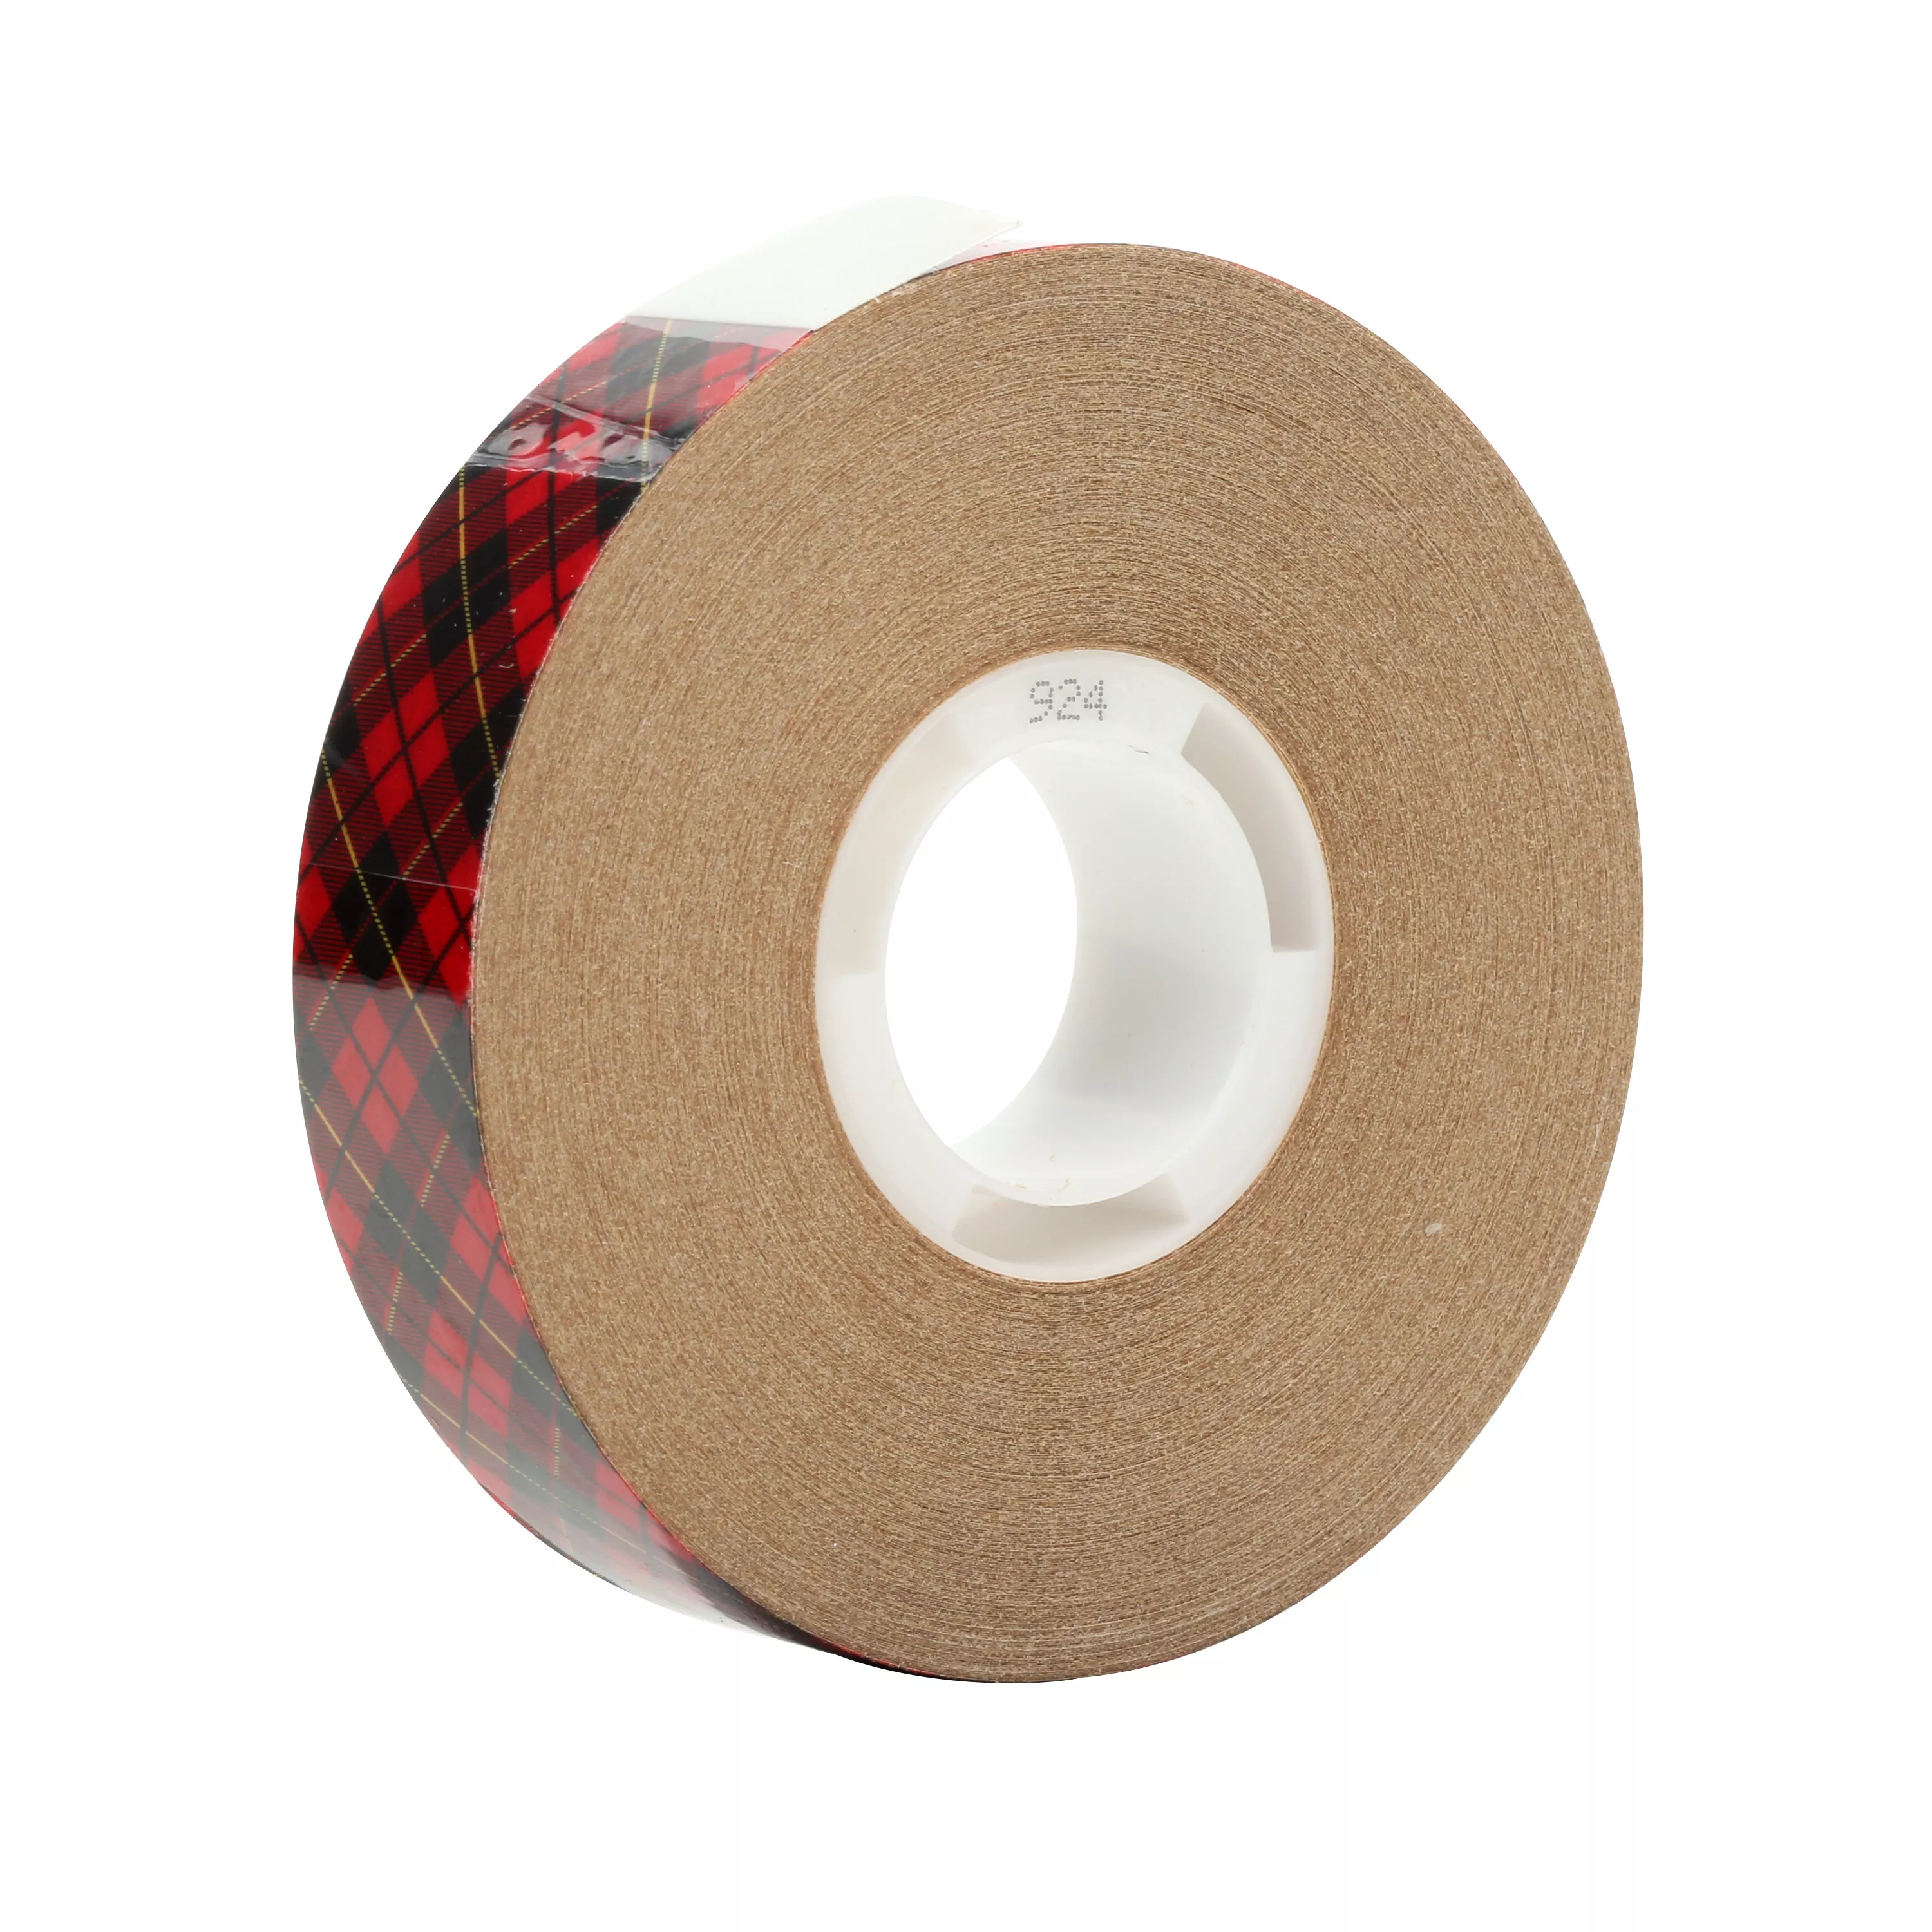 Scotch® ATG Adhesive Transfer Tape 924, Clear, 3/4 in x 36 yd, 2 mil,
(12 Roll/Carton) 48 Roll/Case